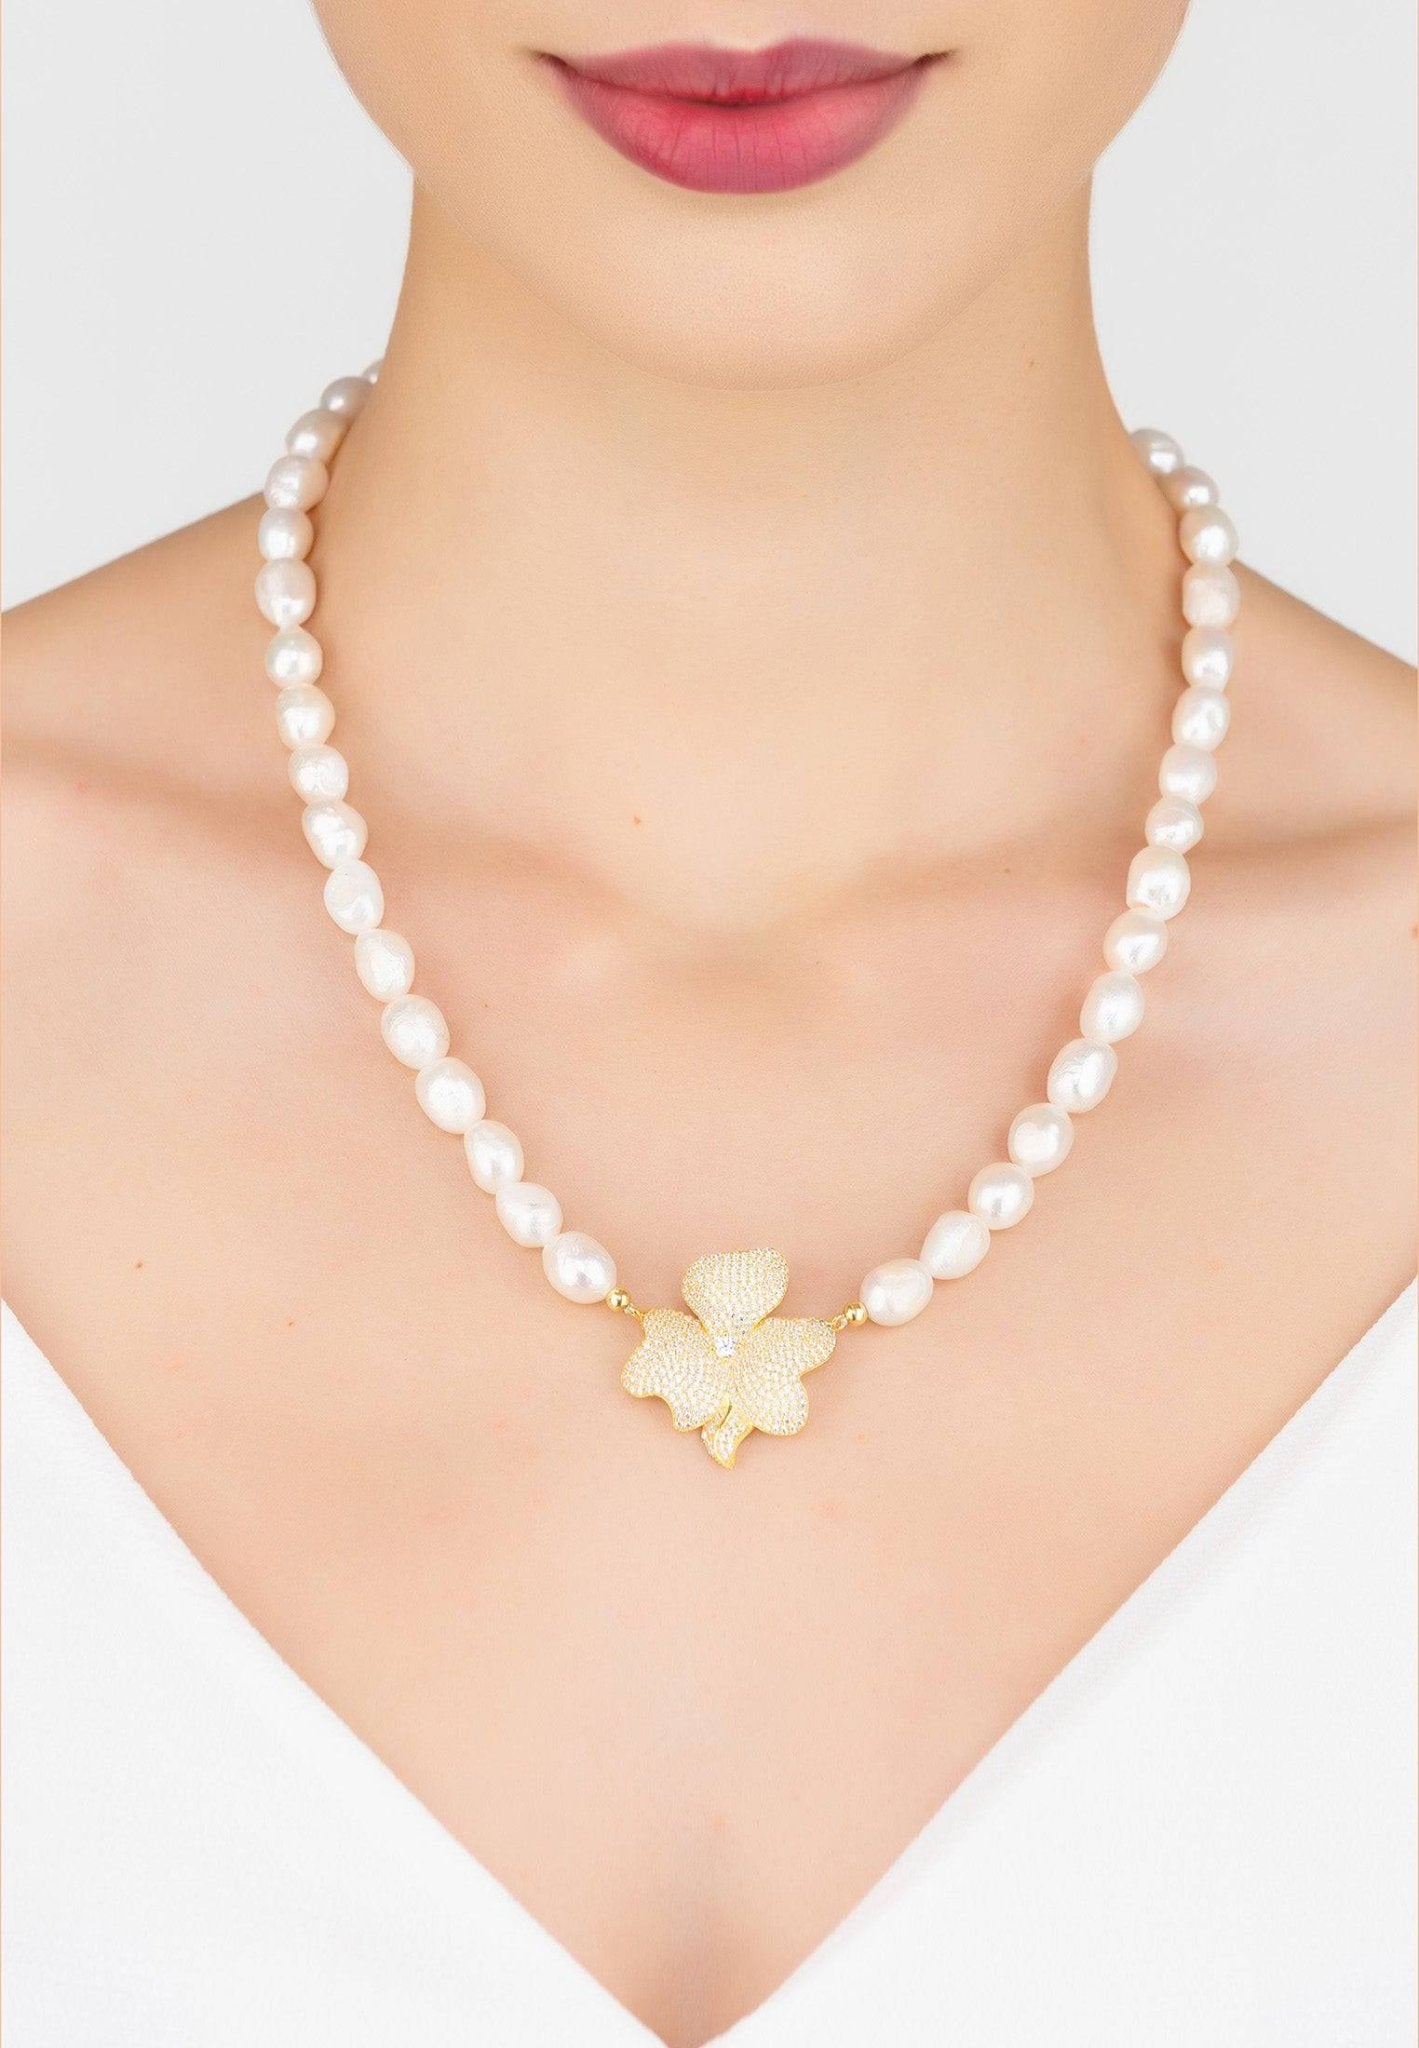 Flower Pearl Mid Length Necklace White Cz Gold - LATELITA Necklaces